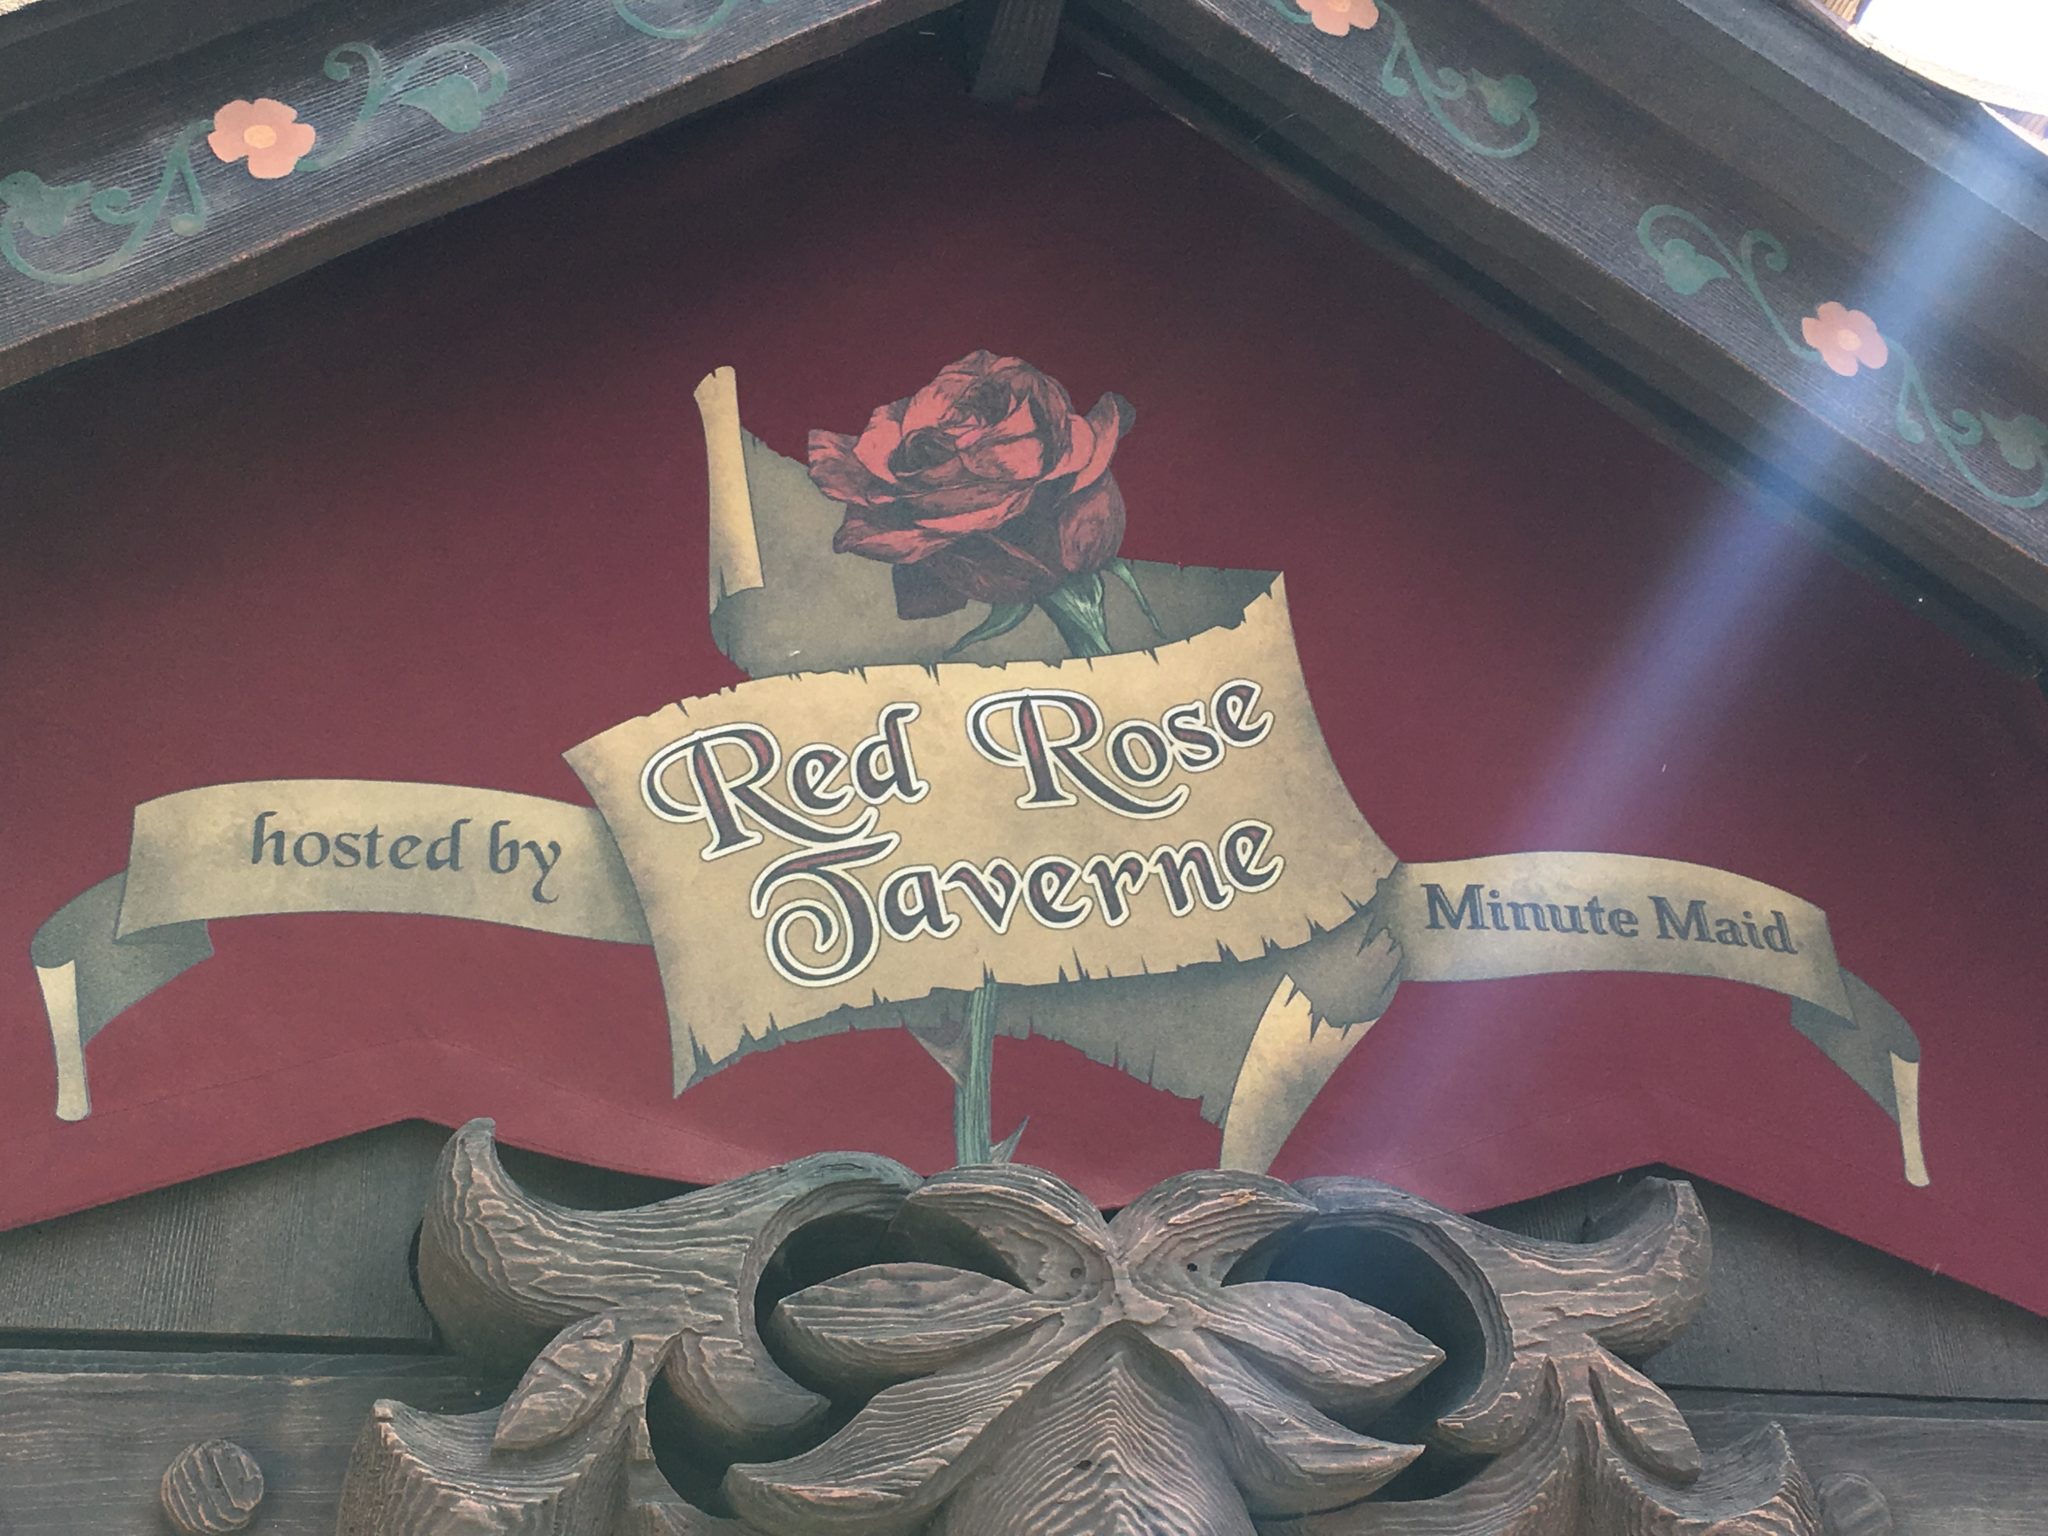 Enchanting Review – the Red Rose Taverne in Disneyland